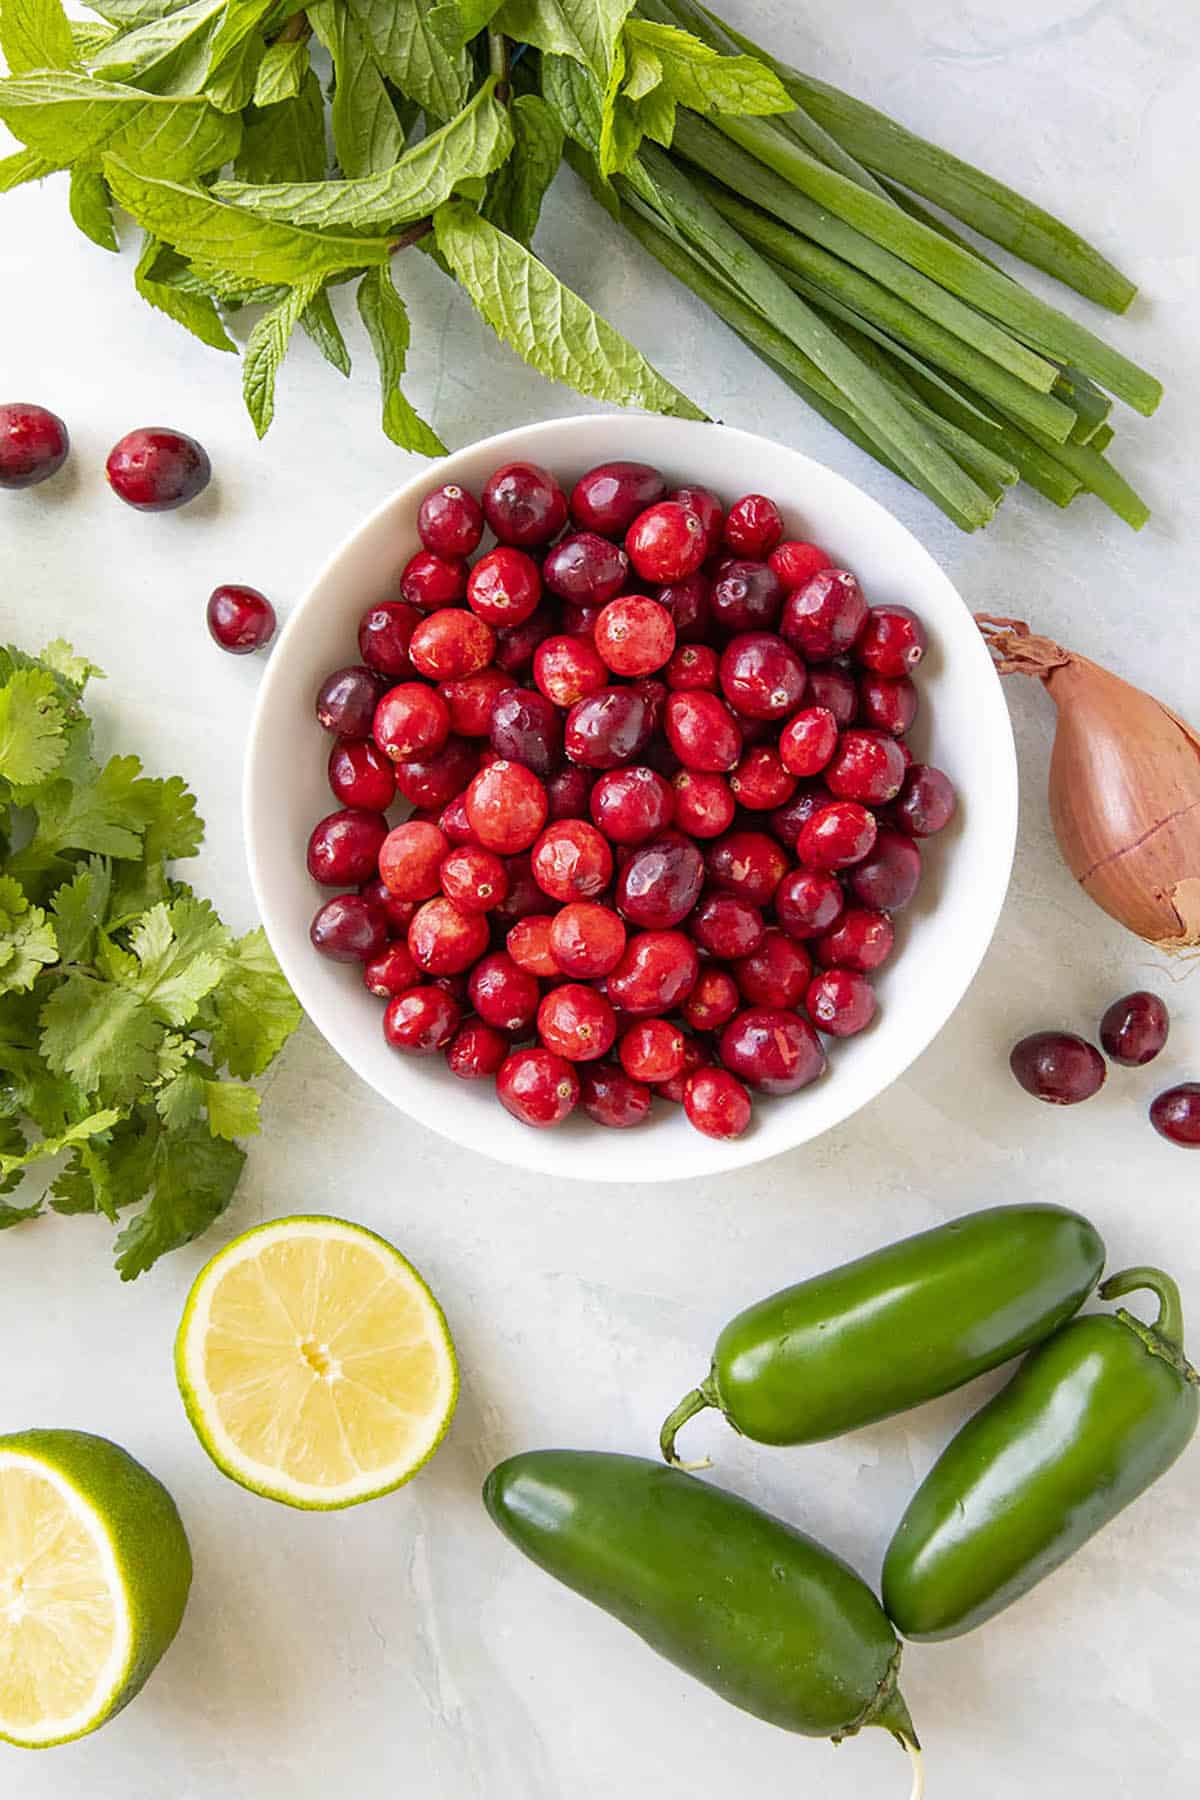 The ingredients for my Fresh Cranberry Salsa Recipe